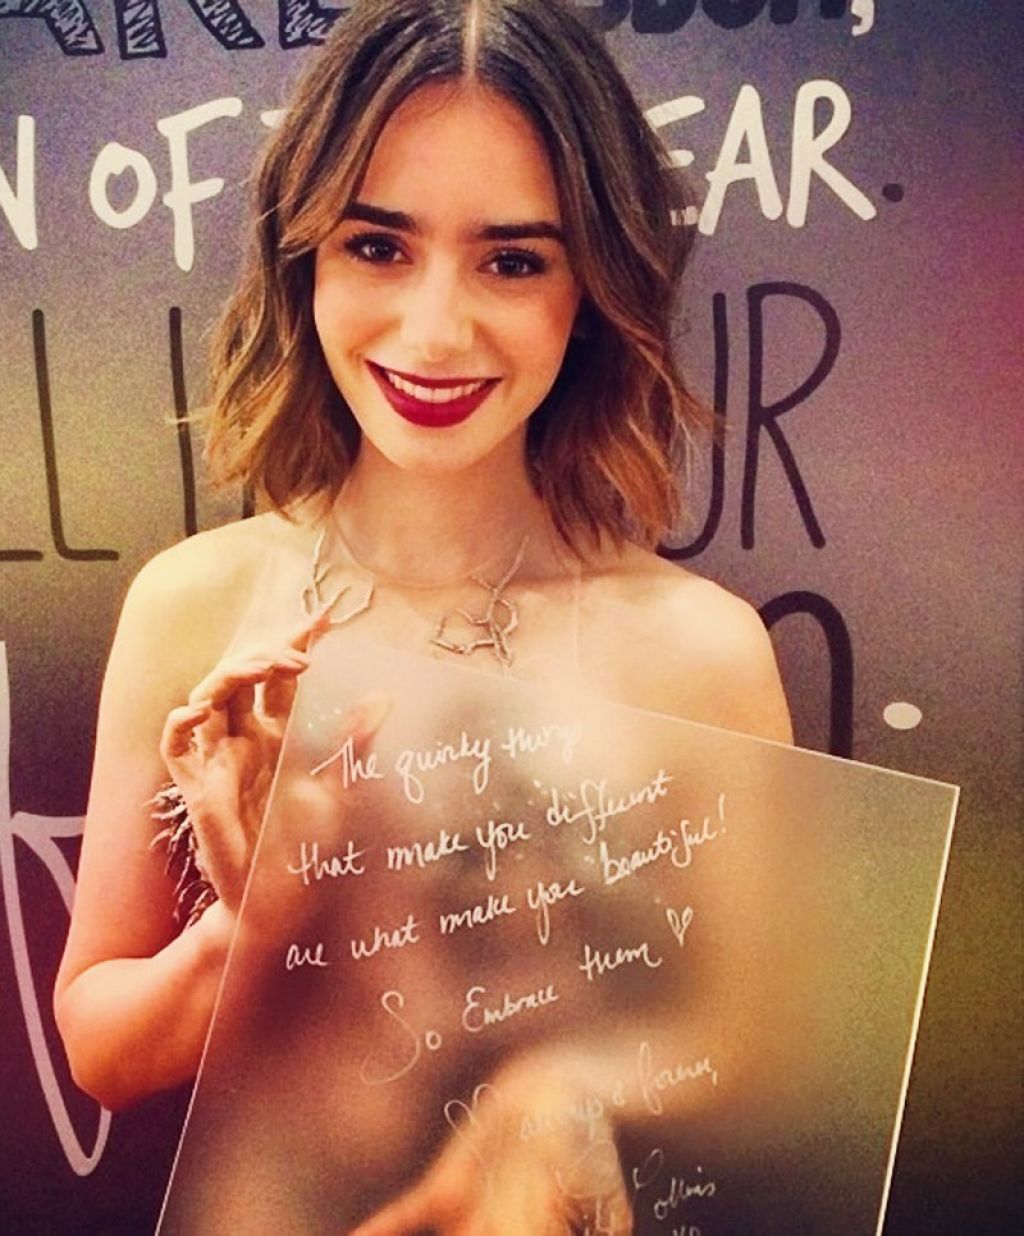 Lily Collins Twitter Instagram Whosay Personal Photos - January 2014 Collec...